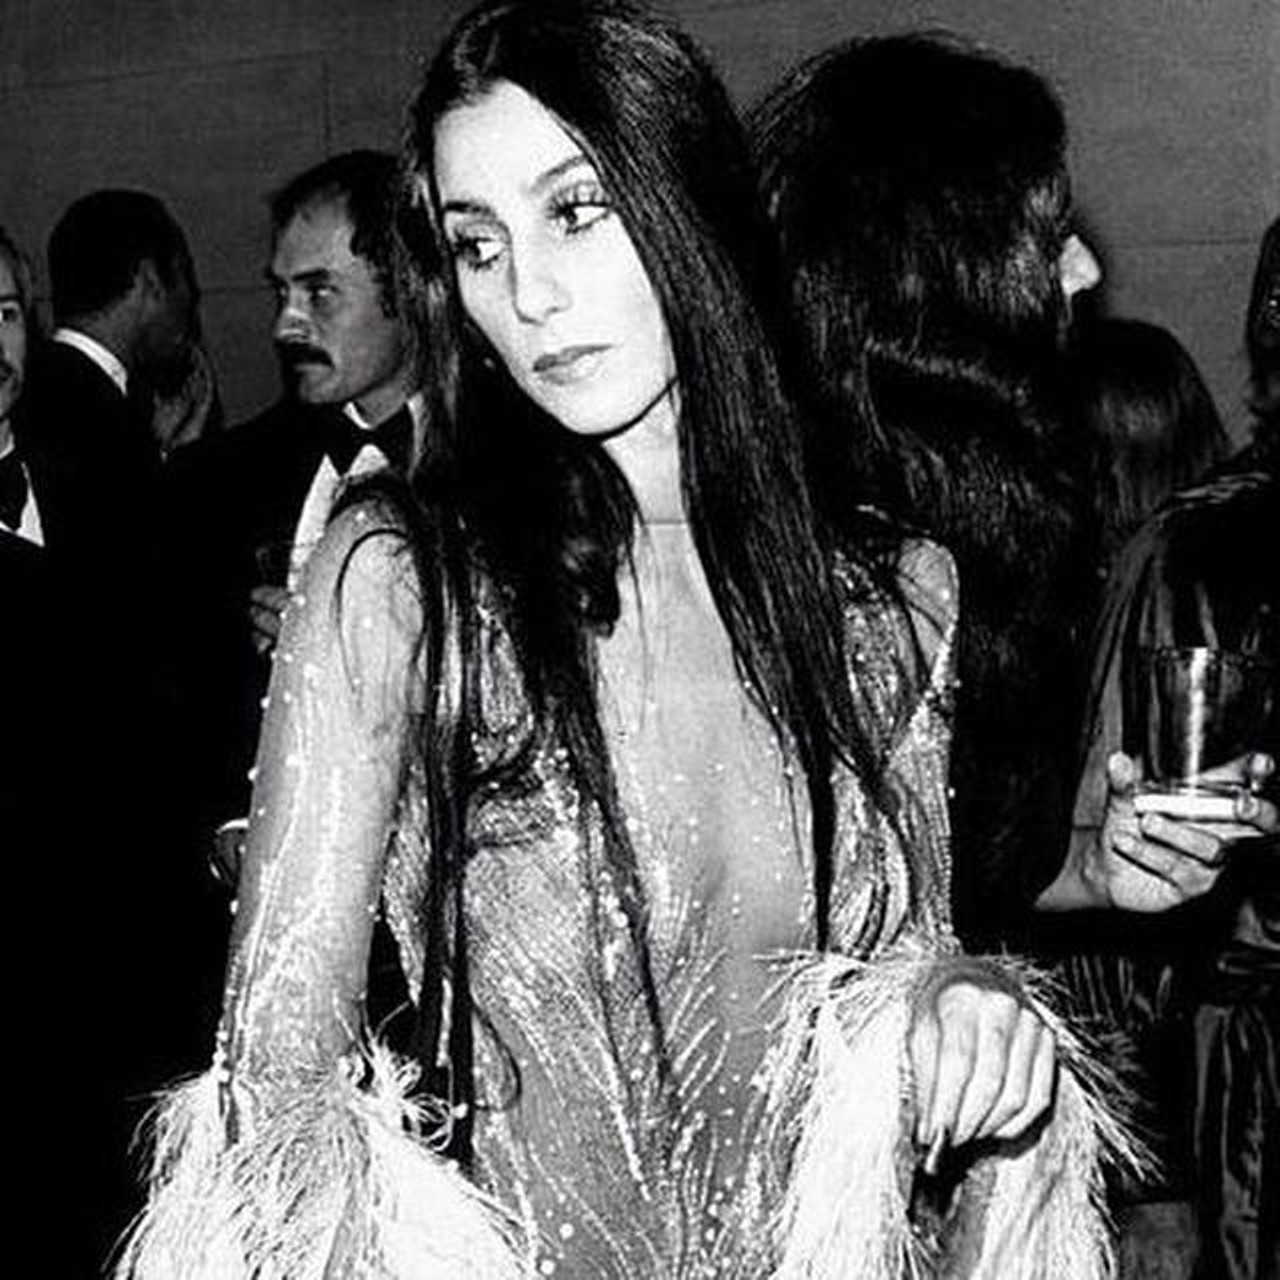 '60s or '70s Cher. Clearly bored AF with all the “regular” people.
Photo via Facebook / Cher